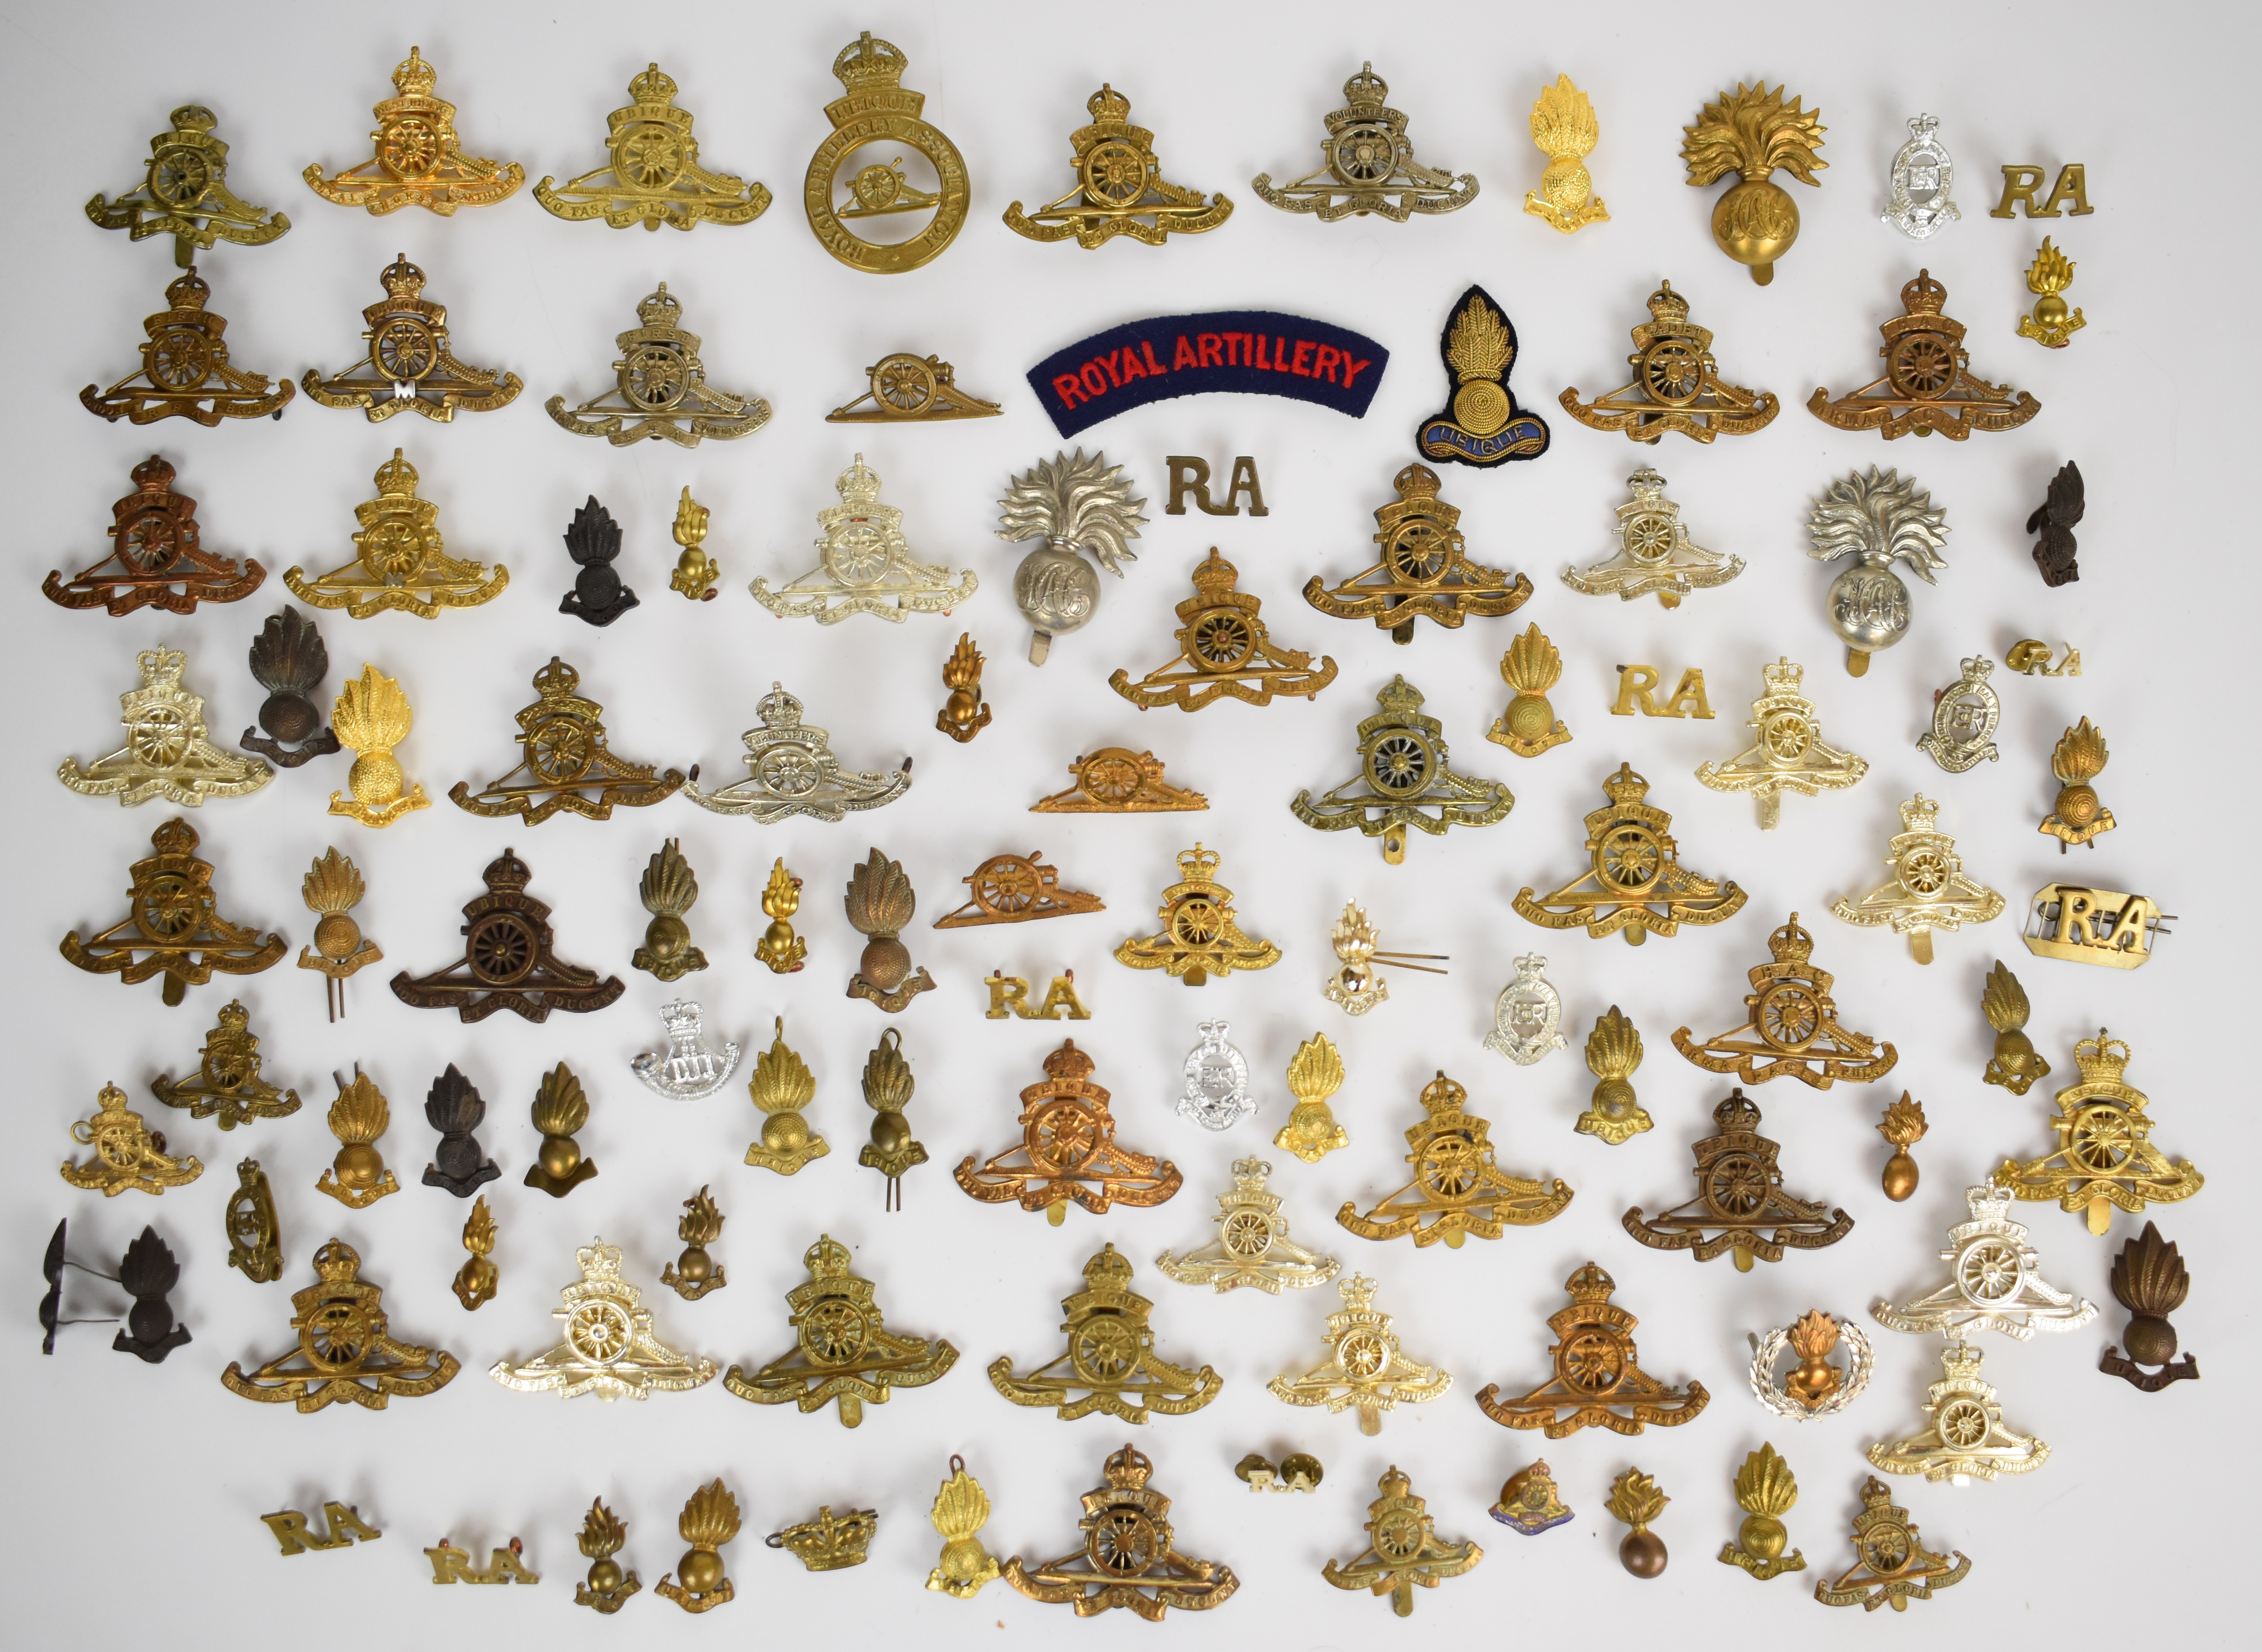 Large collection of approximately 100 Royal Artillery badges including Militia, Volunteer and